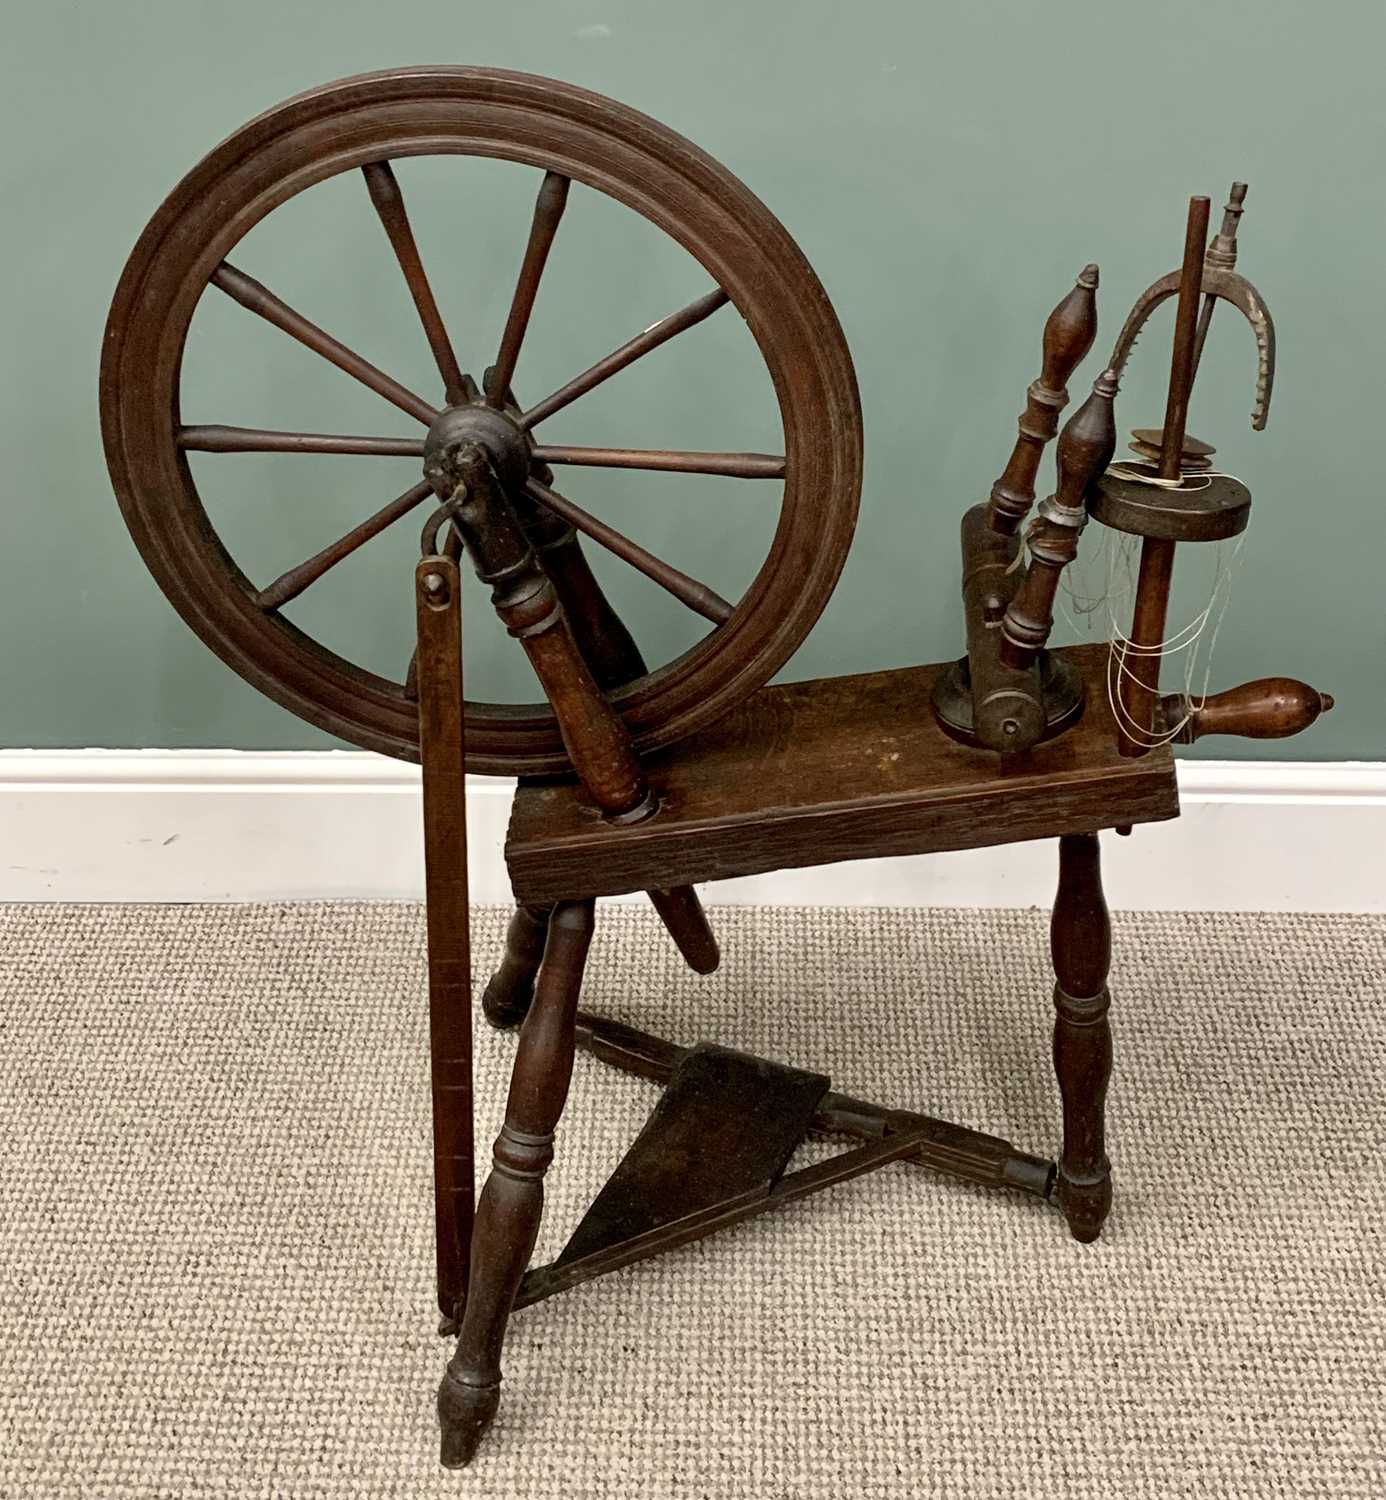 LATE 18TH CENTURY MIXED WOOD SPINNING WHEEL, 97cms overall H, 86cms W, 50cms max. D - Image 4 of 4